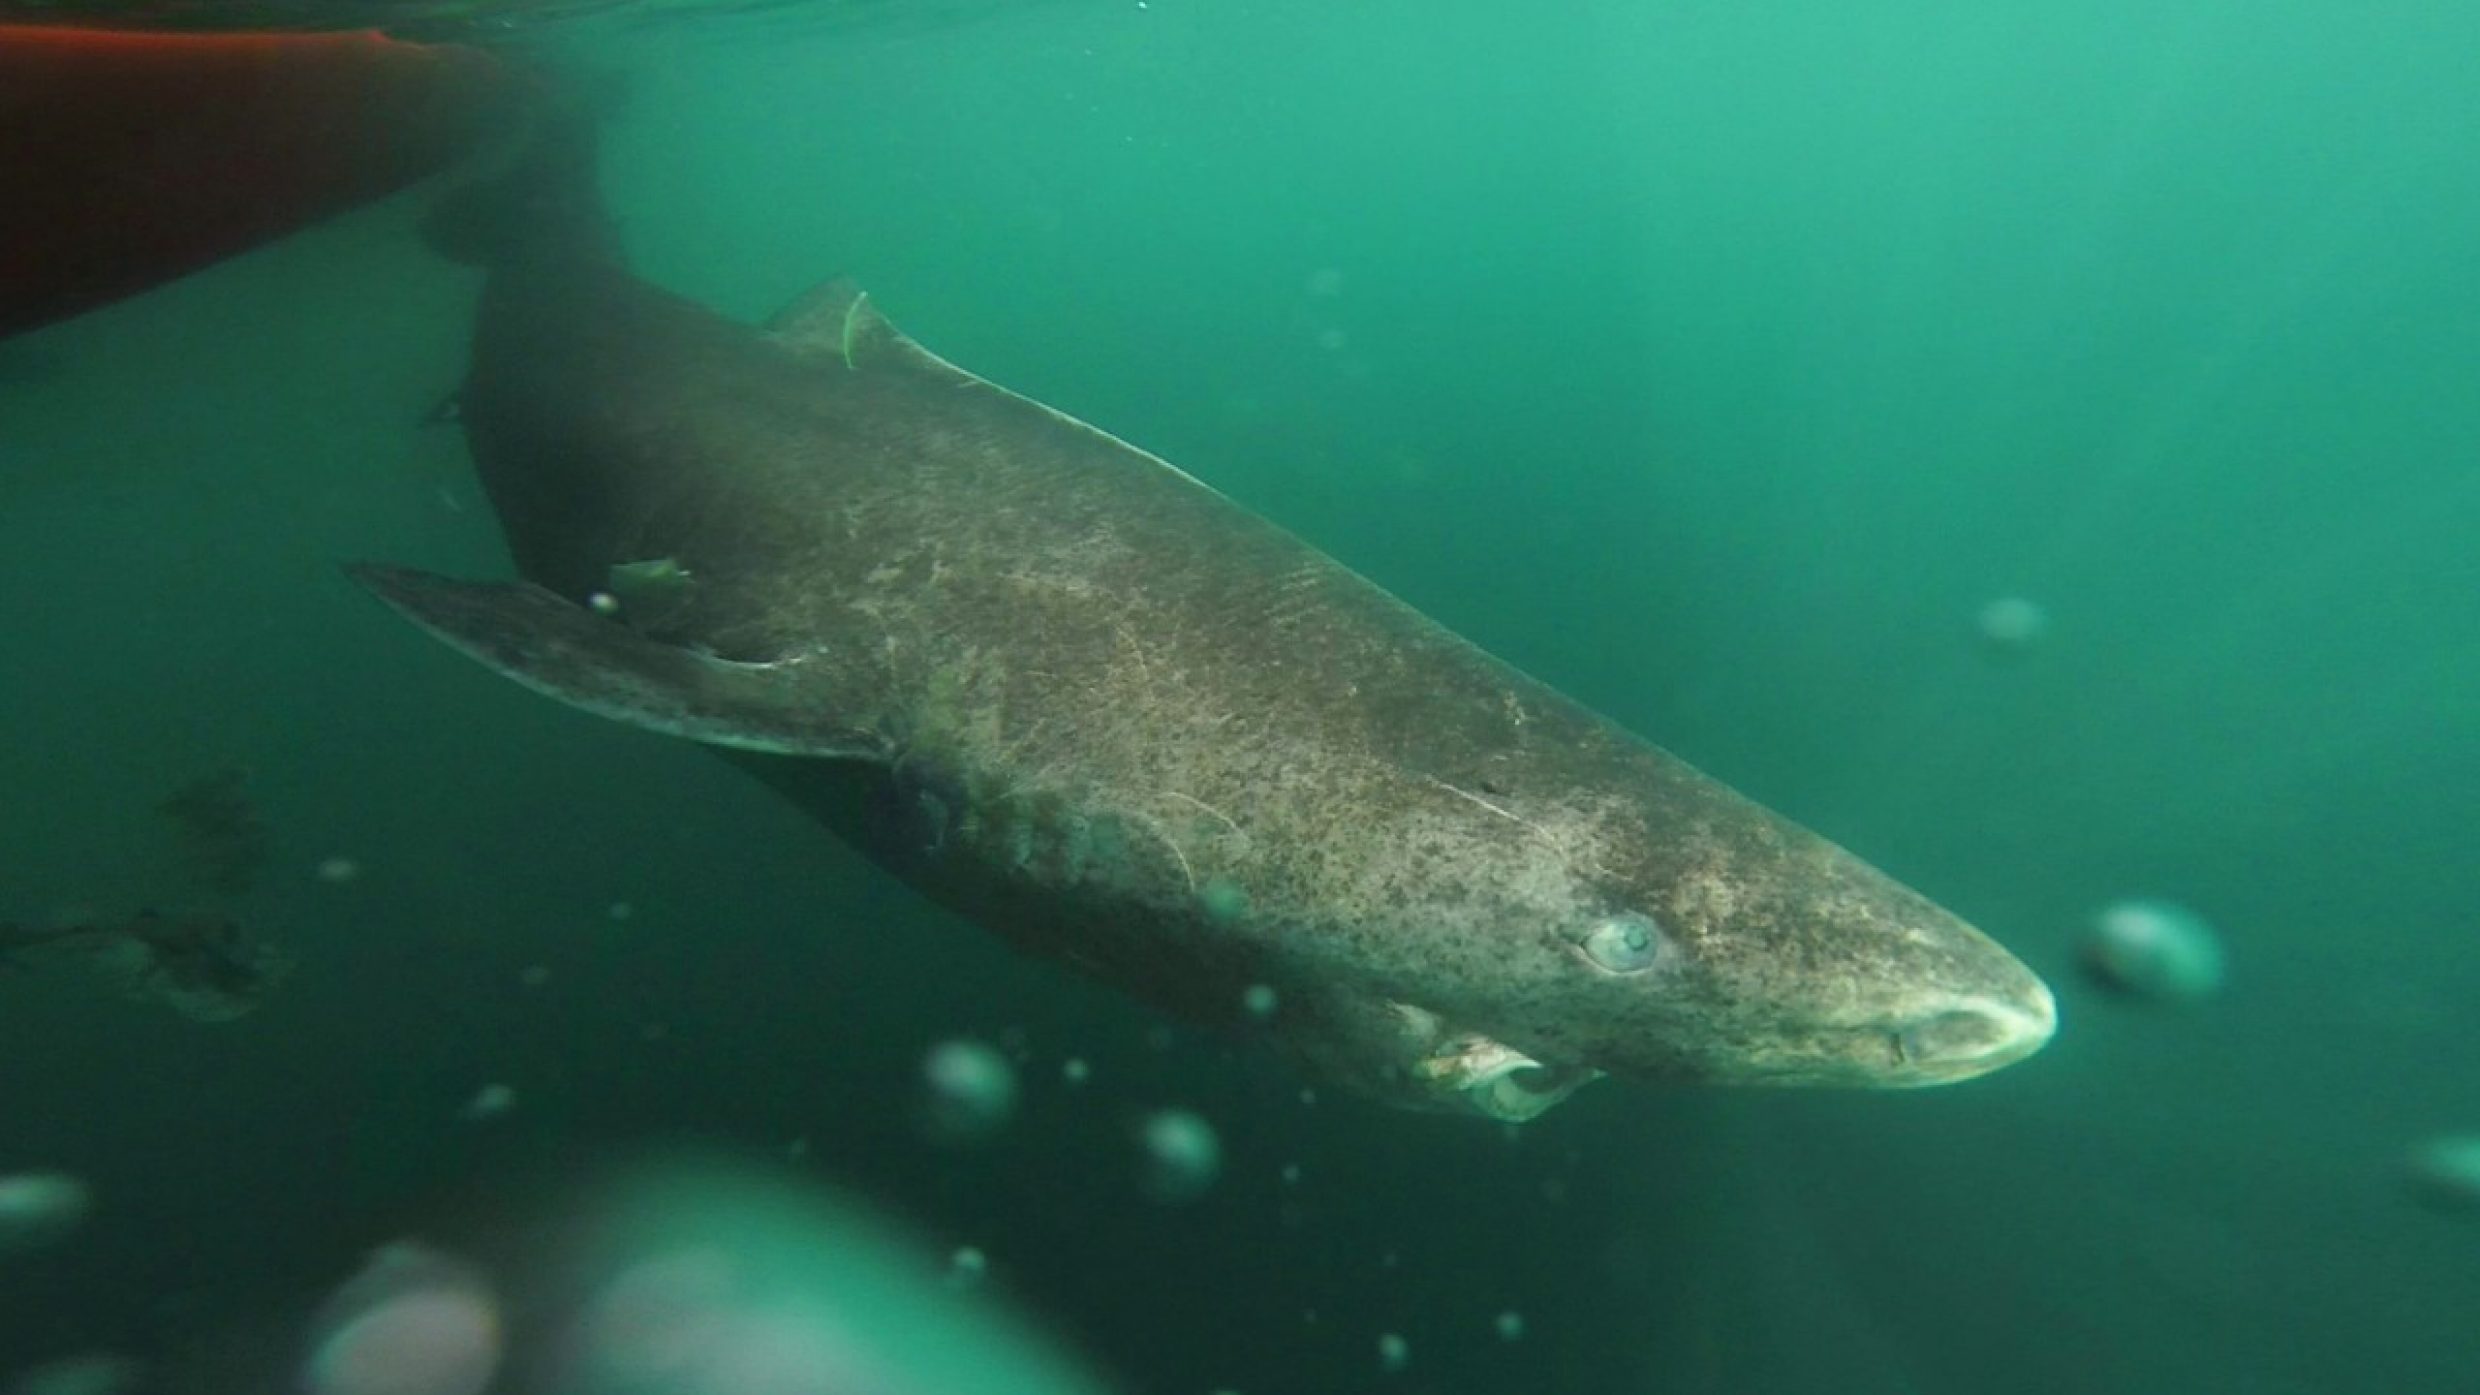 The Methuselah of vertebrates can live to 400 and longer. The predatory greenland shark lives in the North Atlantic, grows to over five metres and only reaches sexual maturity at the age of 200.